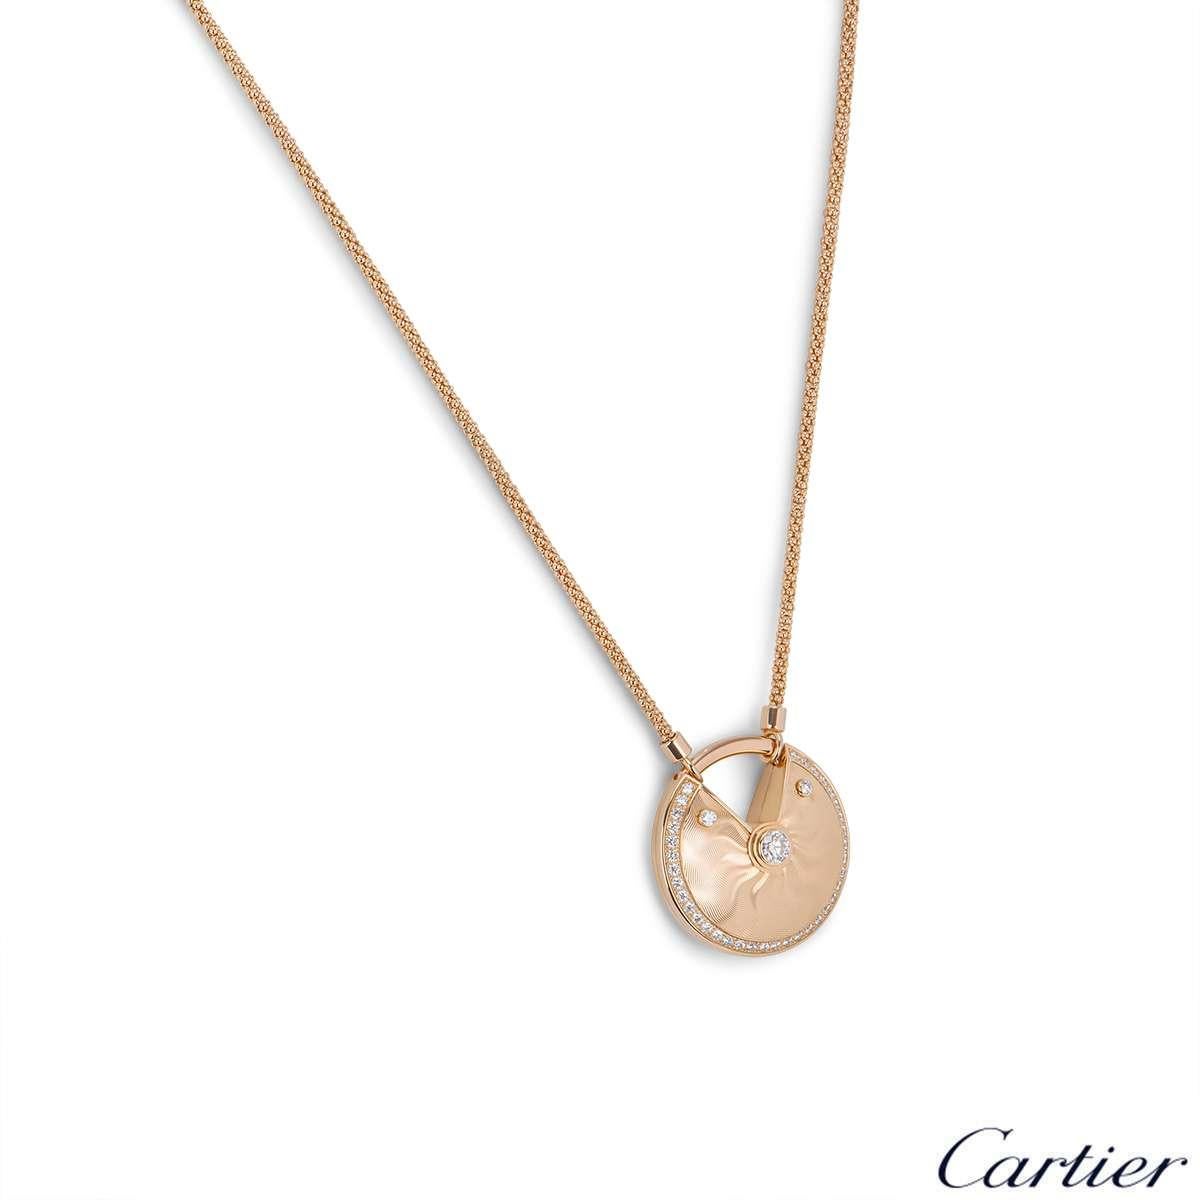 A rare18k rose gold large size necklace from the Amulette de Cartier collection. The necklace comprises of a circular talisman displaying a guilloche pattern, complemented by round brilliant cut diamonds totalling approximately 0.58ct. The talisman